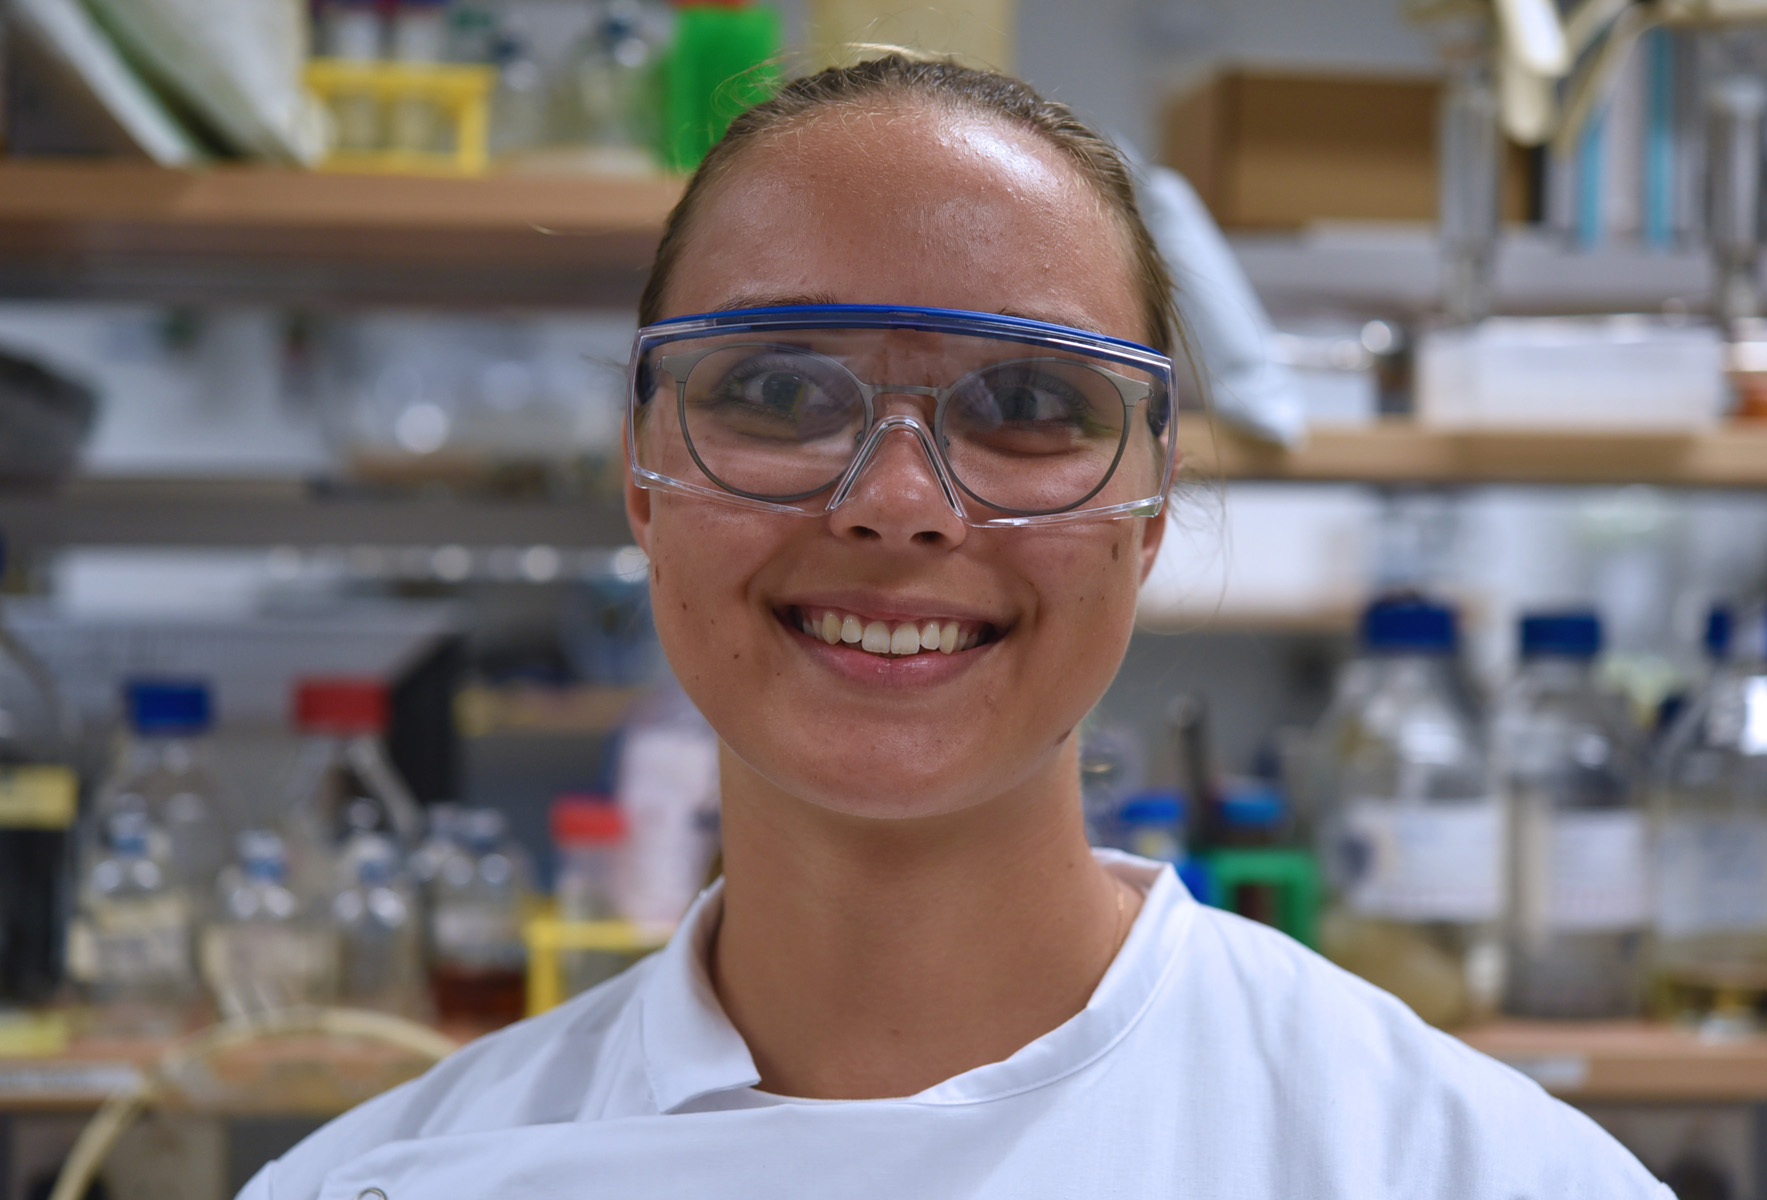 Much of the work done by Antonia Ebert and the wider UQ Biosustainability Hub team revolves around harnessing biological processes to produce fuels, chemicals, ingredients, and other biomaterials in a more sustainable way.